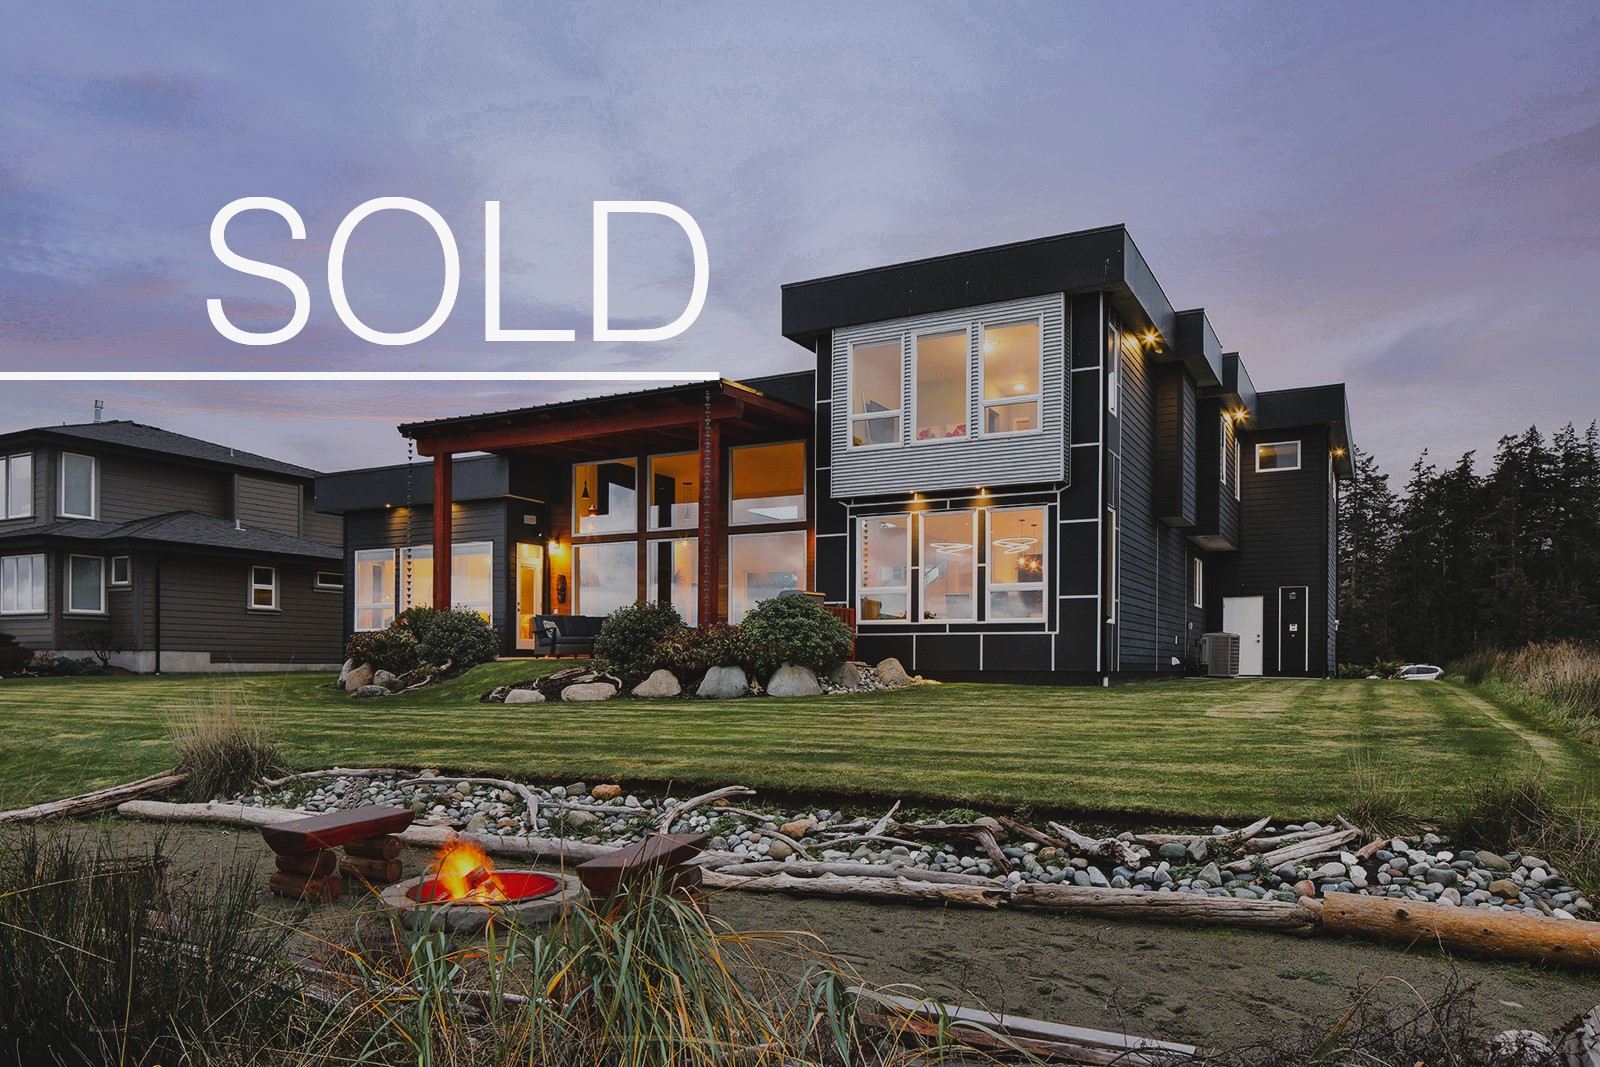 Sold Homes